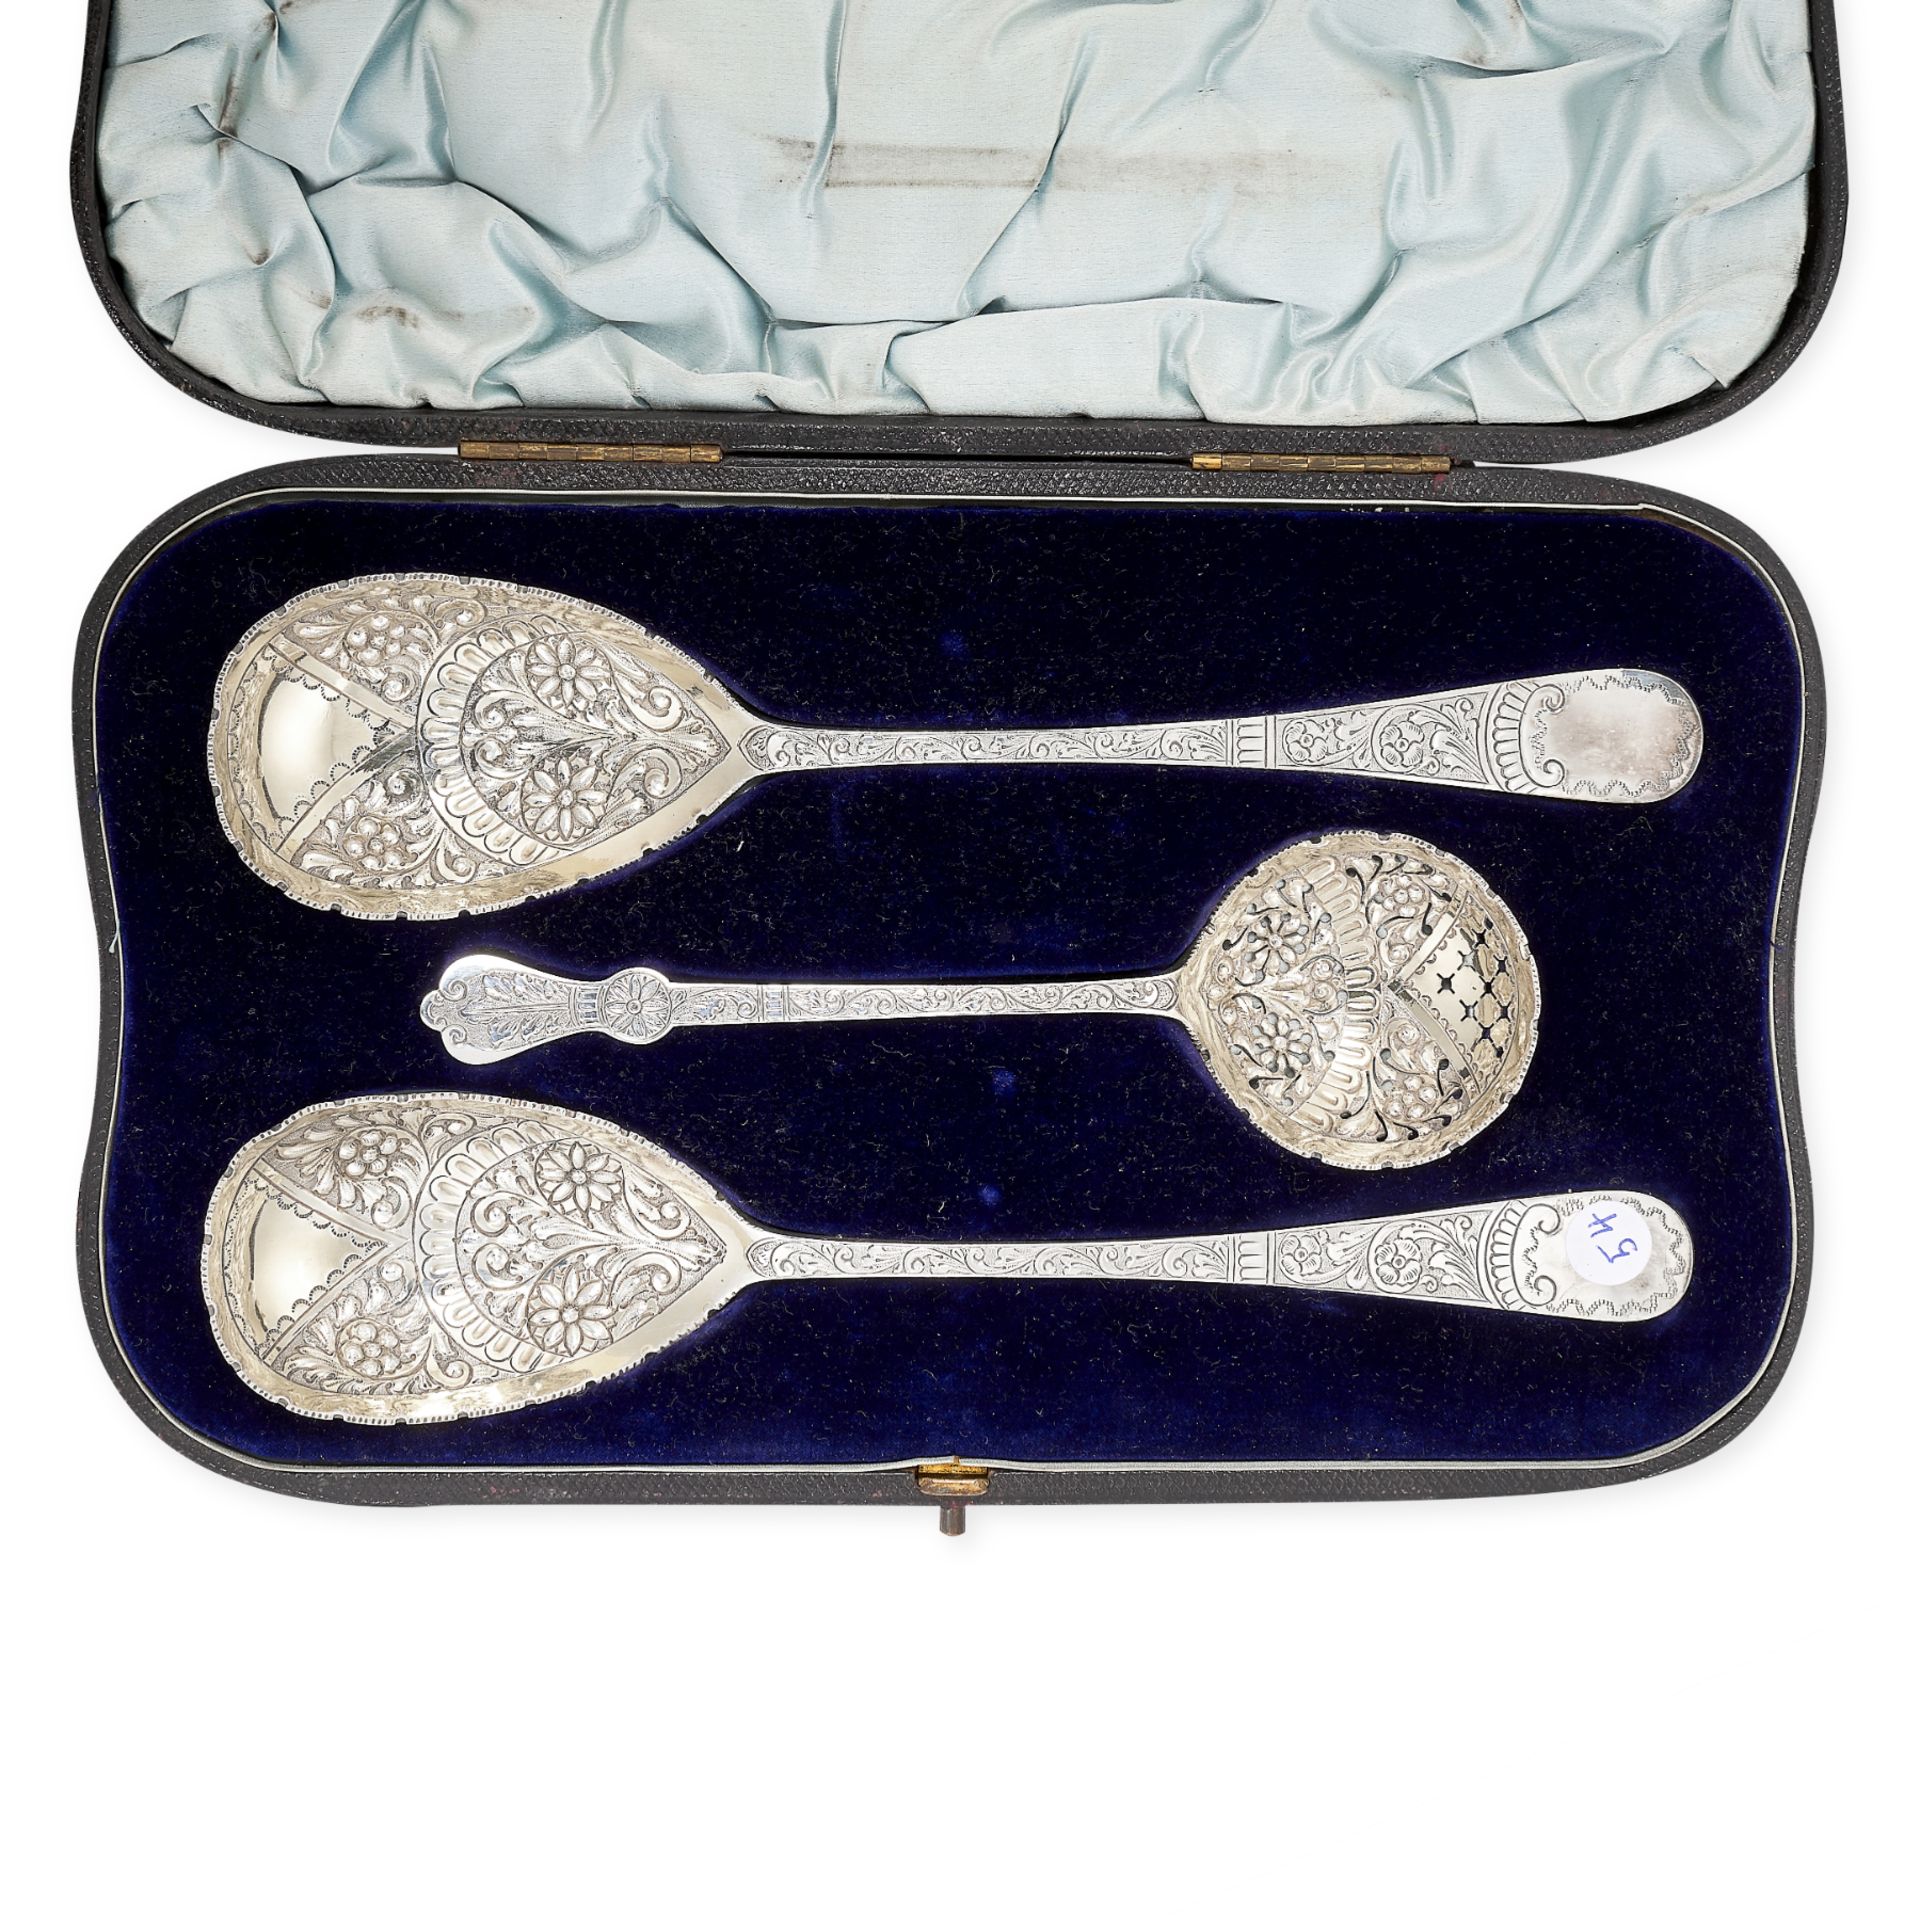 NO RESERVE - AN ANTIQUE VICTORIAN STERLING SILVER FRUIT SERVING SET, WILLIAM HUTTON & SONS, LONDON